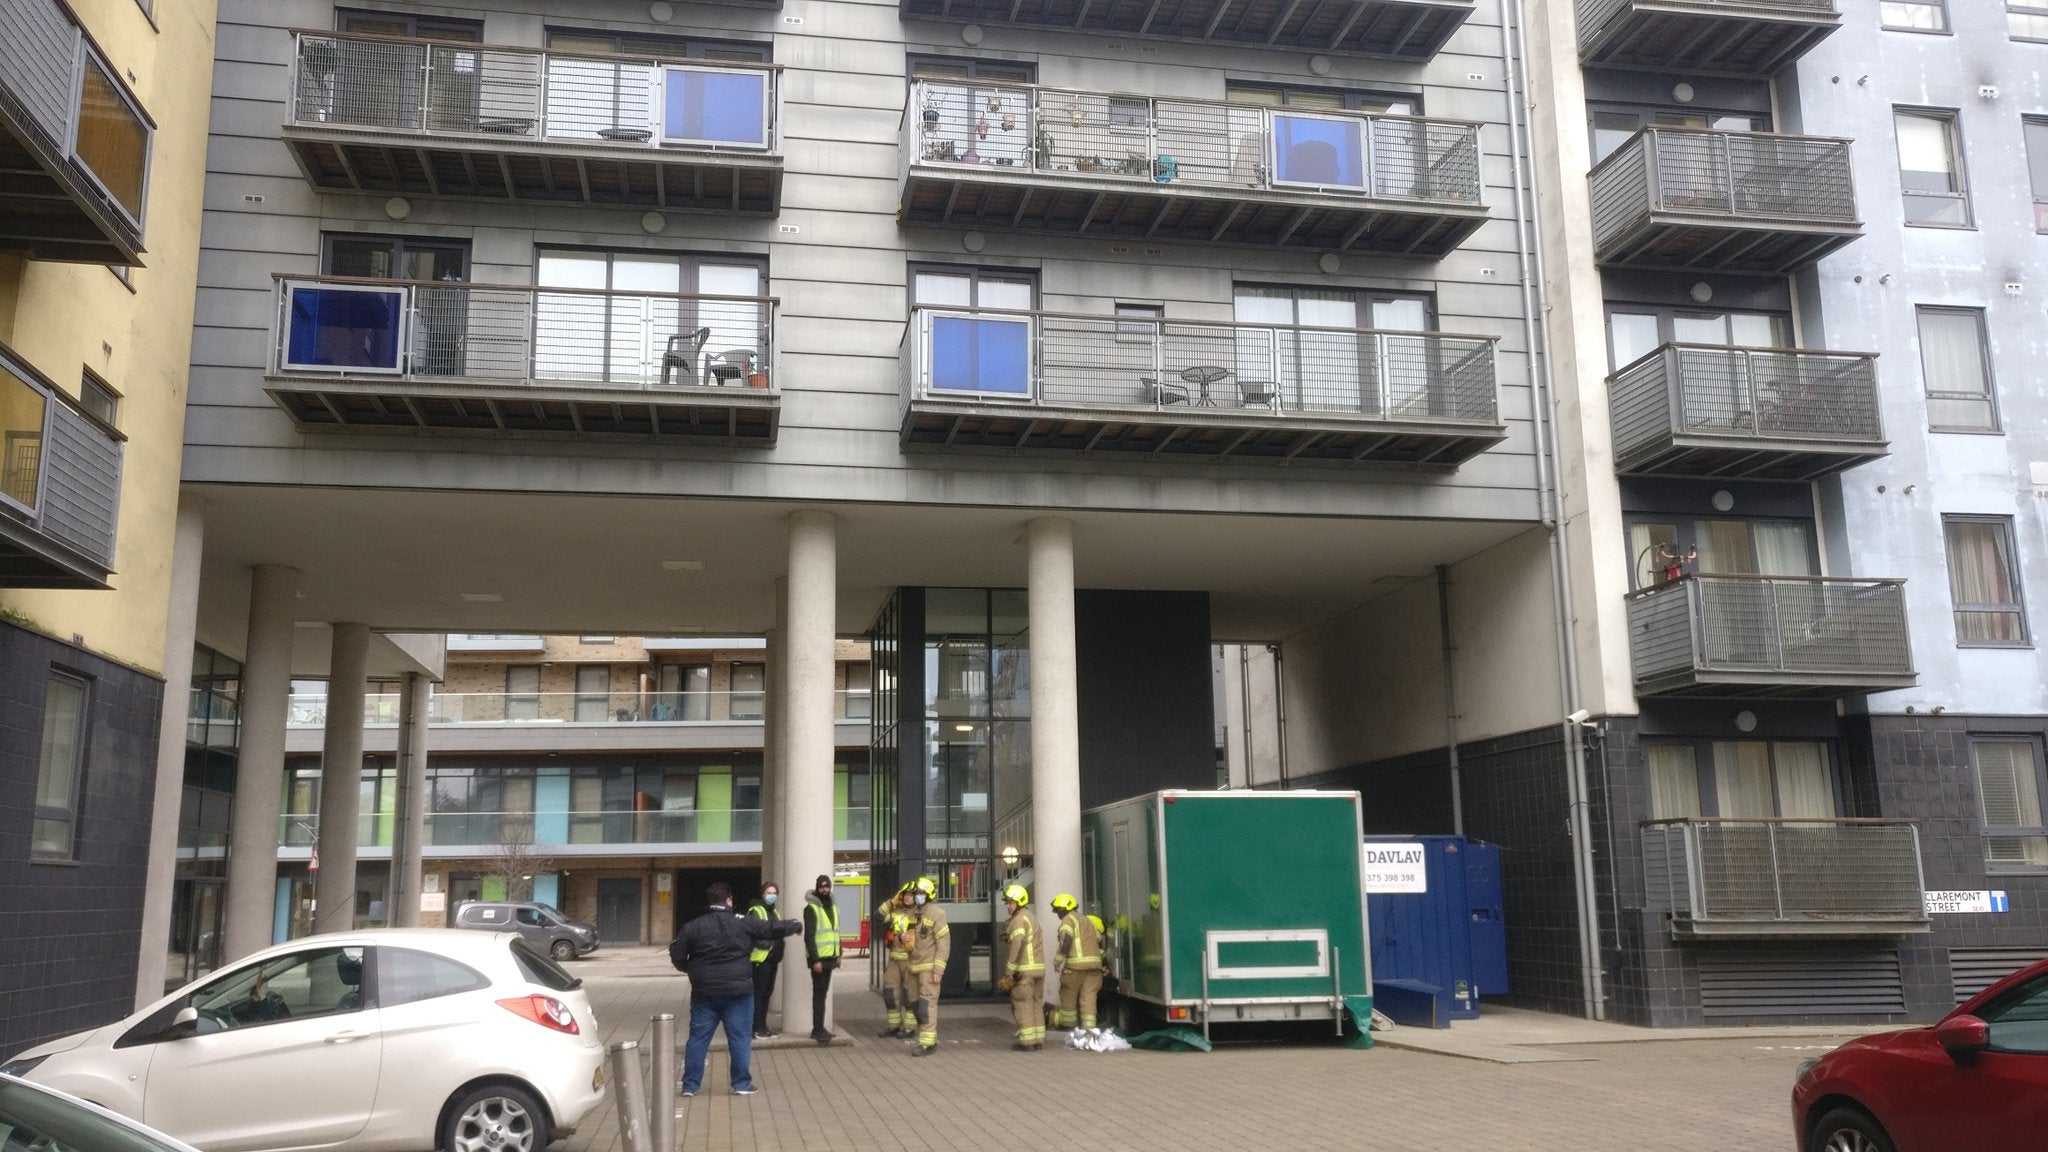 The cabin was positioned directly under flats covered with flammable material